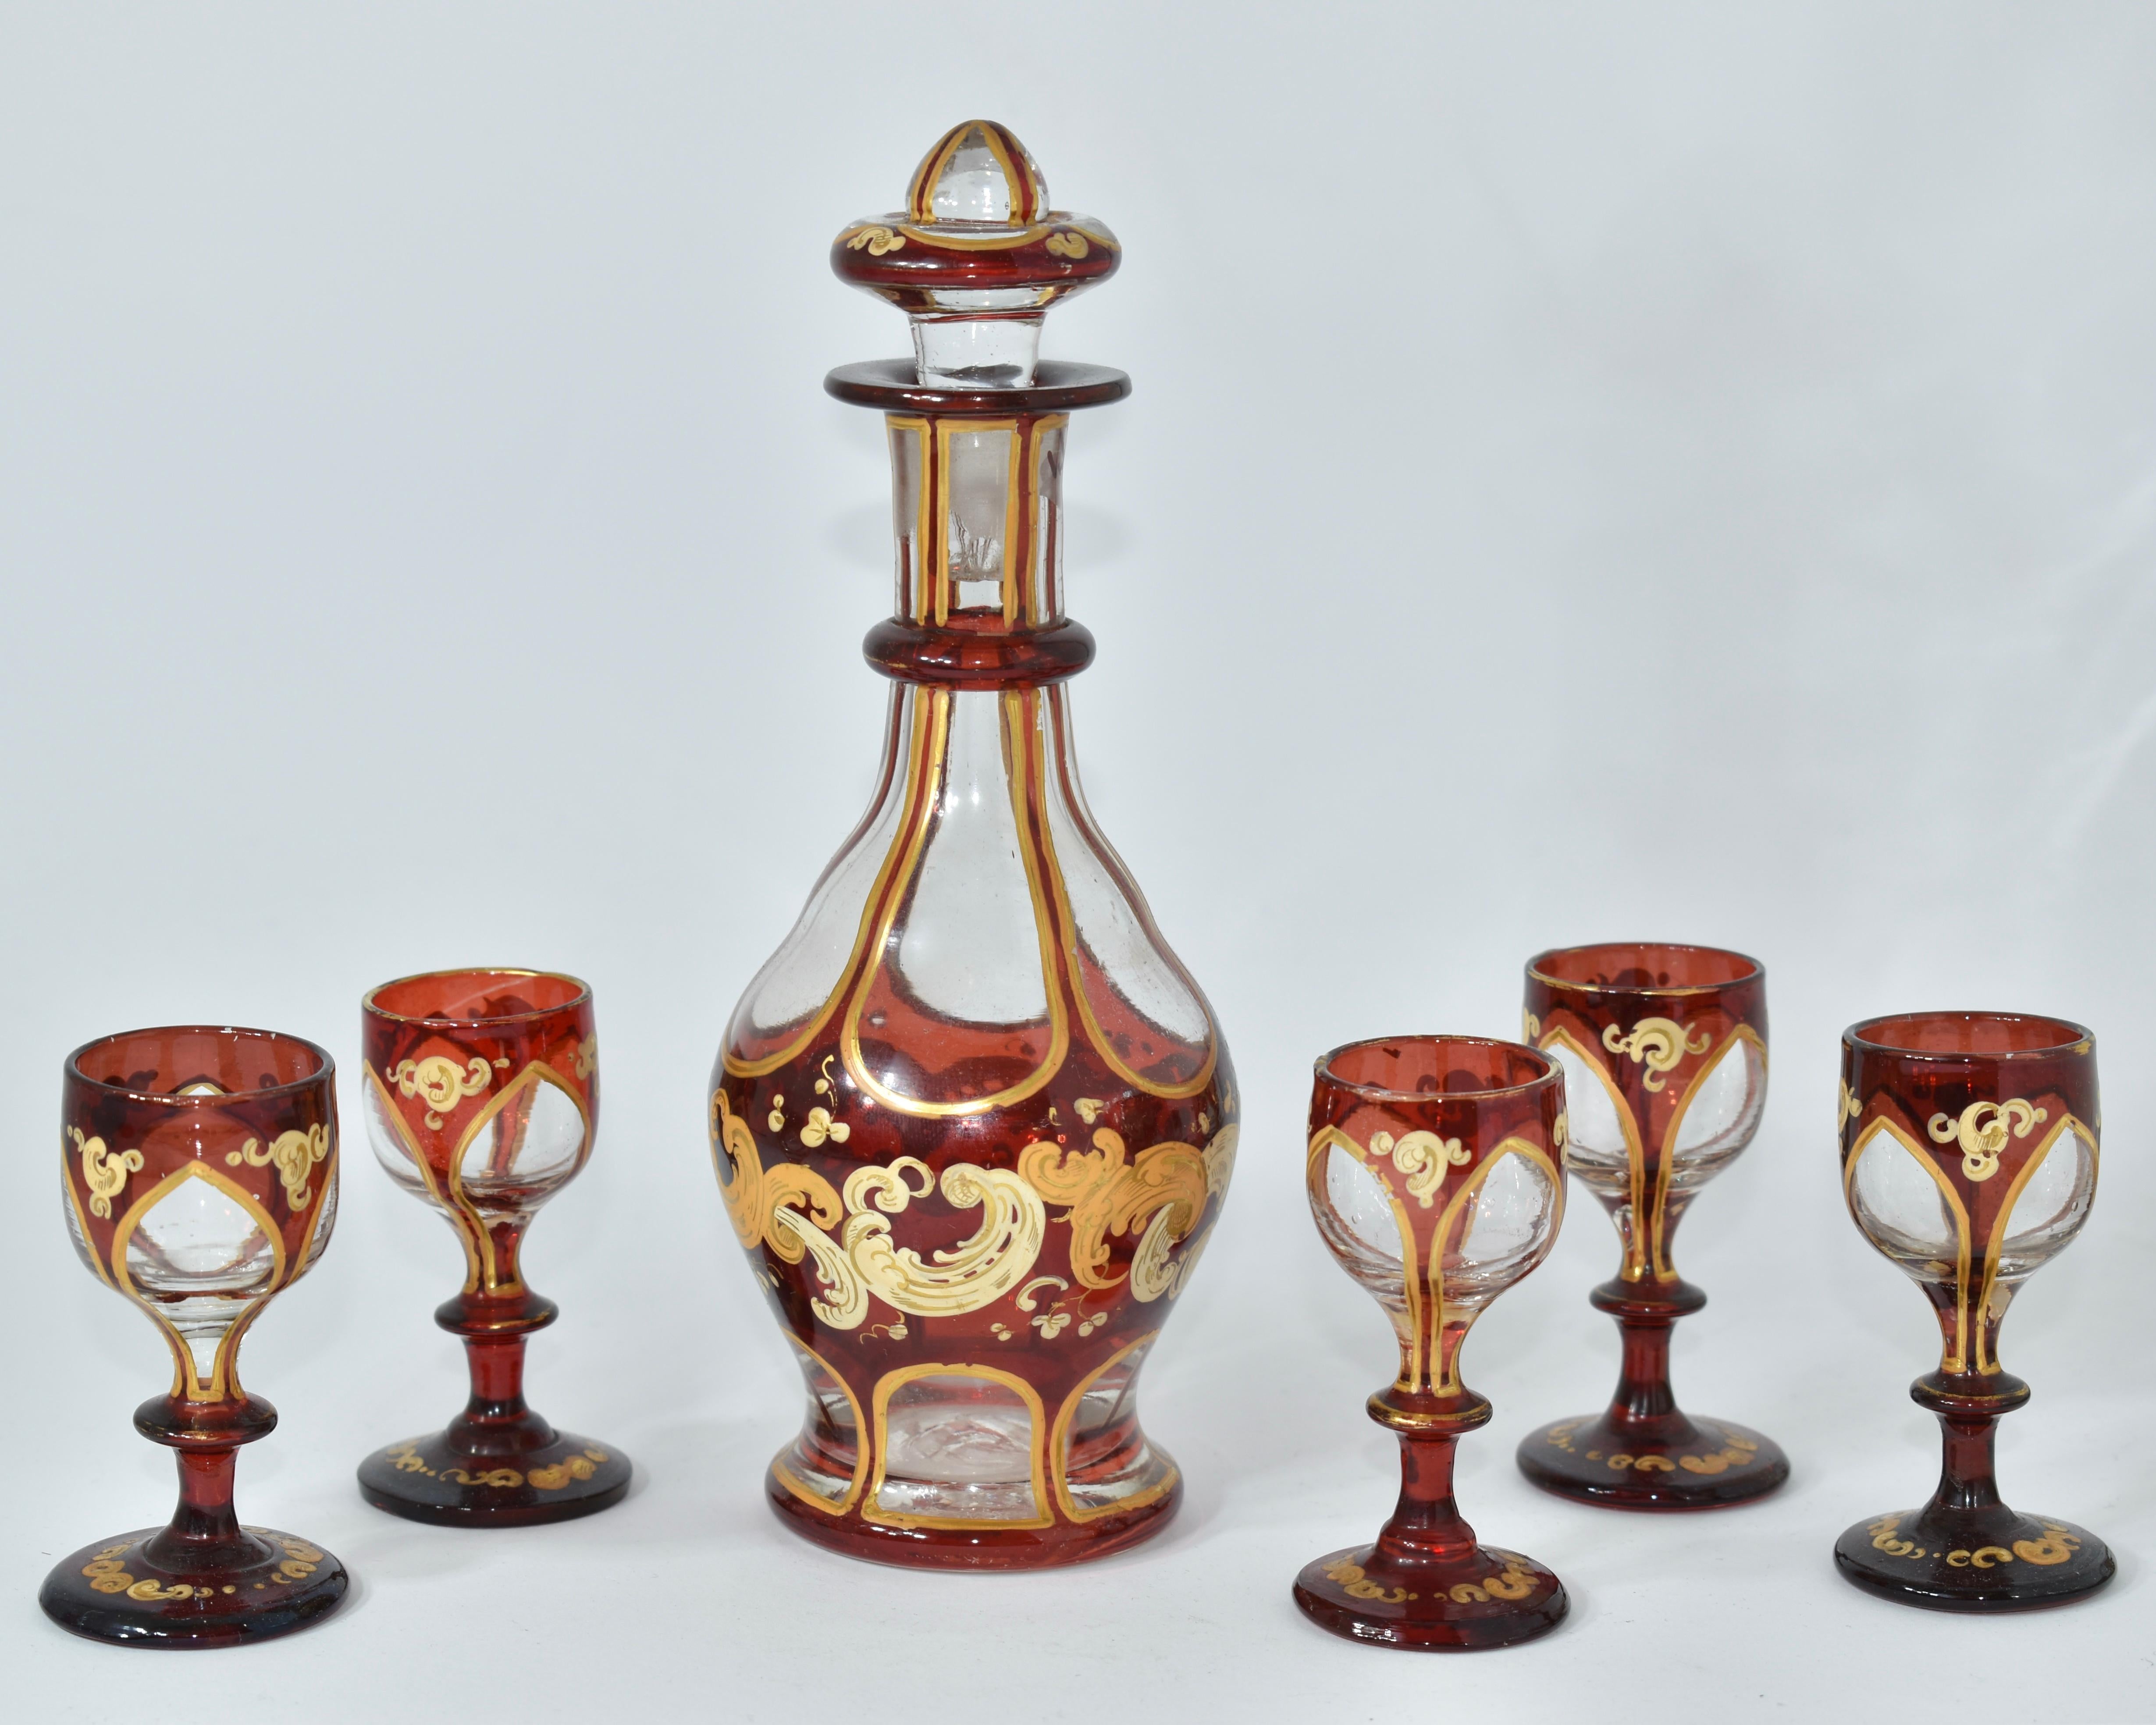 Beautiful Liqueur Set, Decanter with 5 matching Glasses

Bohemian Clear and Ruby Red Glass 

Richly Decorated all around with Gilded Enamel Scrolls and Gilding Highlights

Bohemia, 19th century.